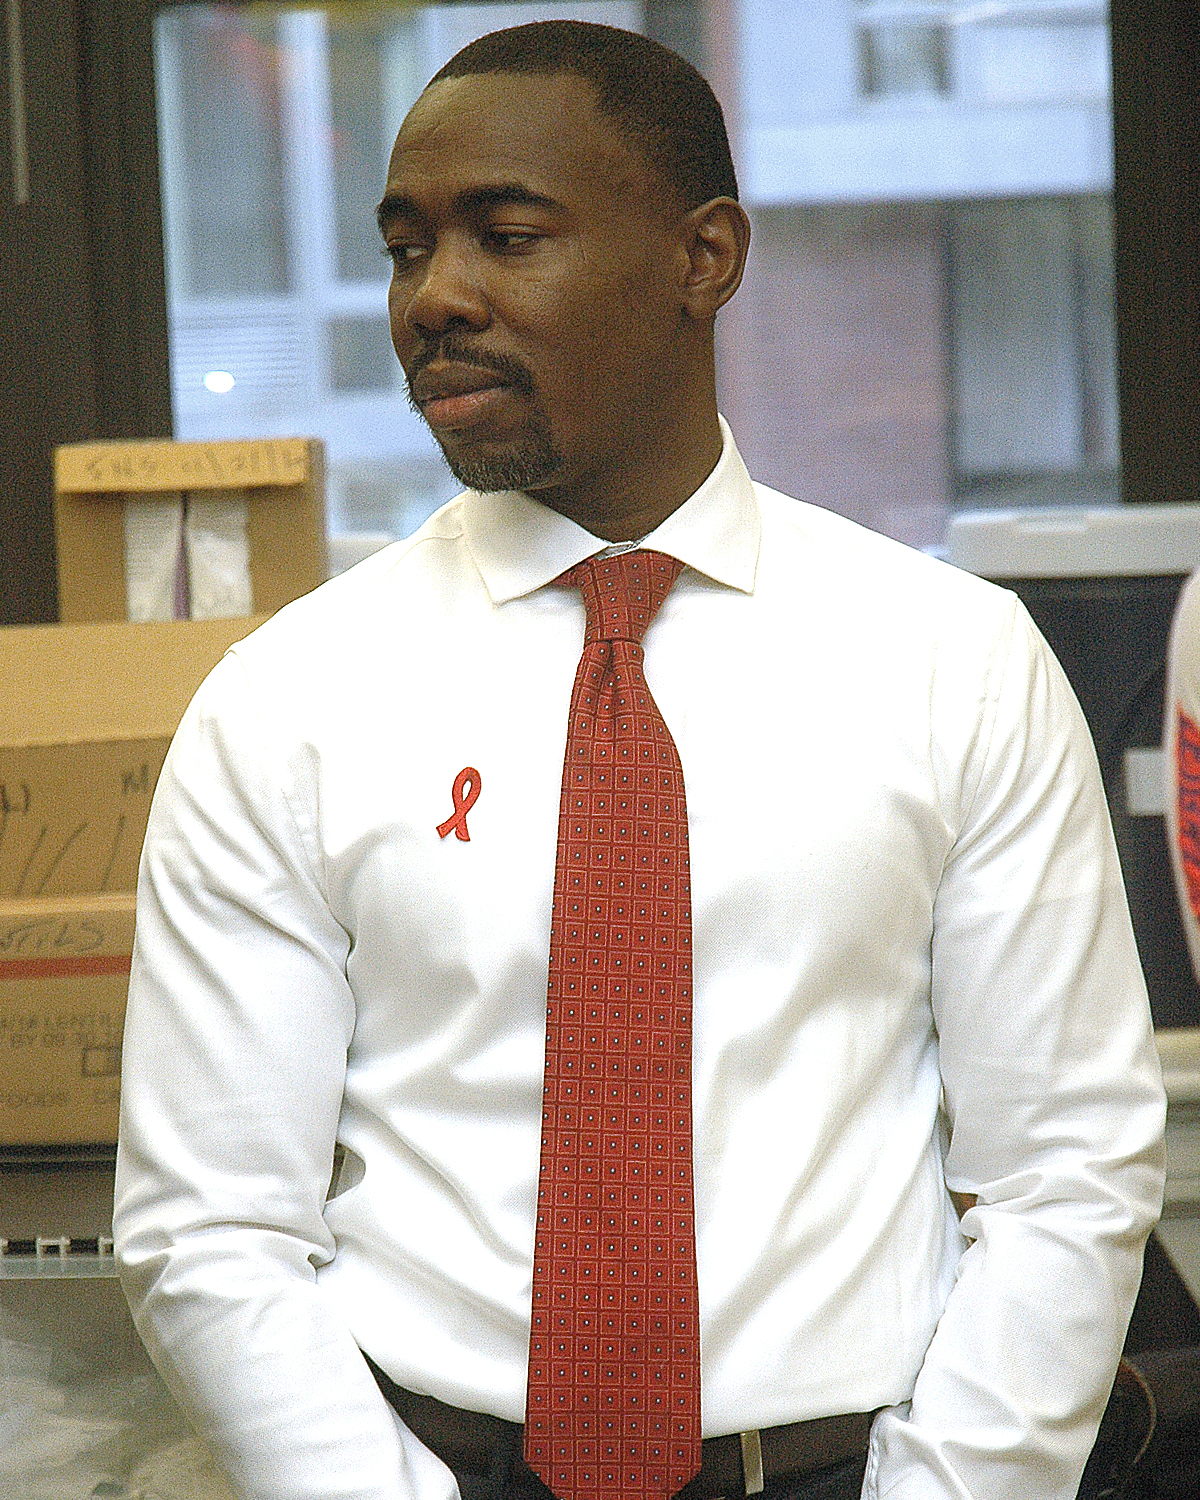 AIDS In Our Community: Reading of Names - Jean Pierre Louis, Associate Manager